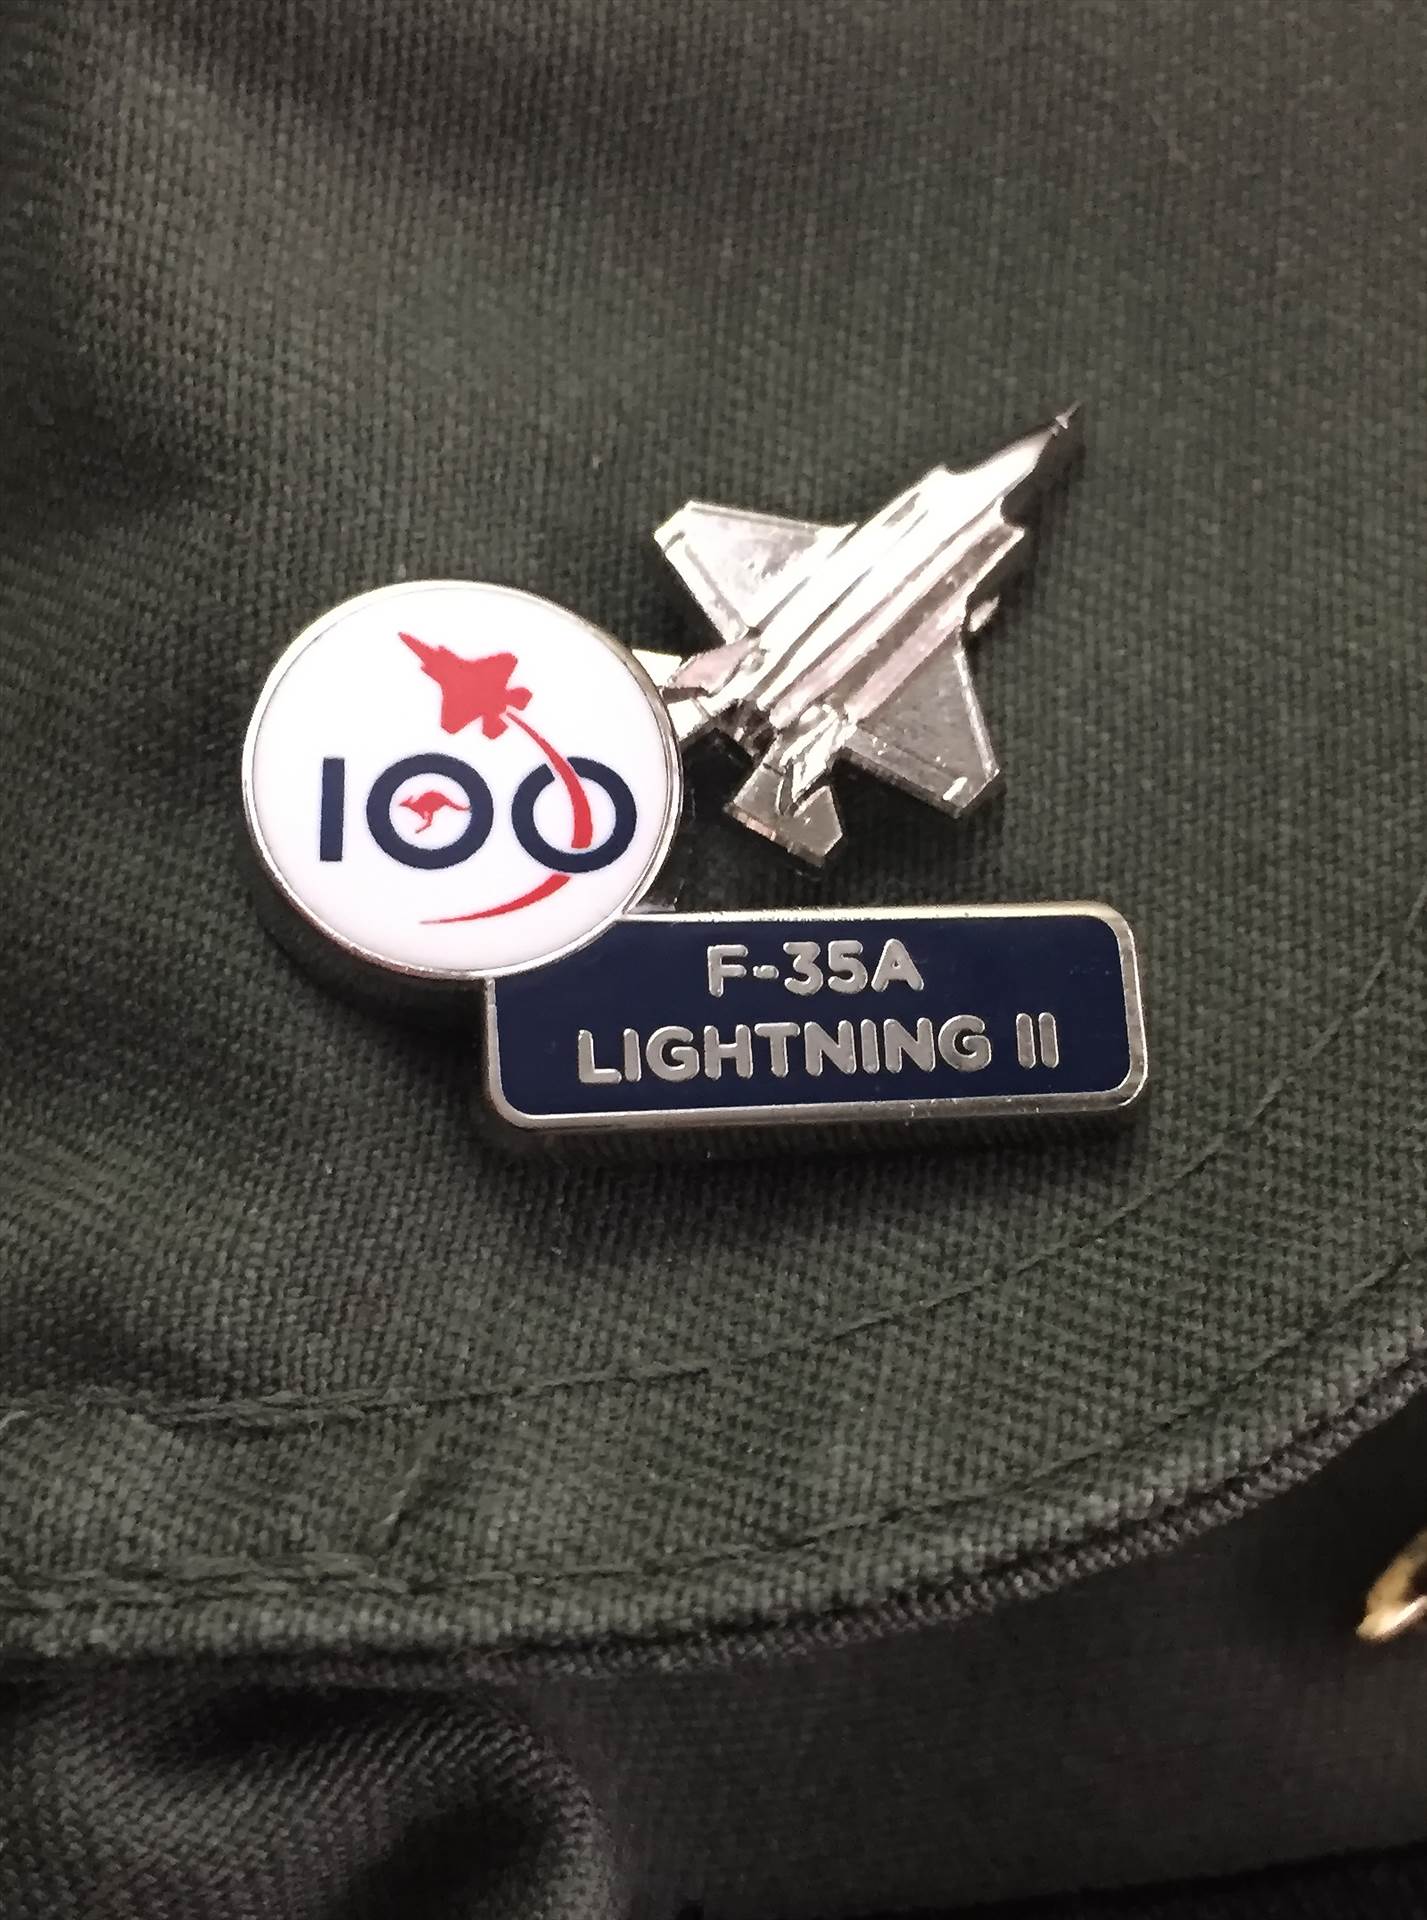 Air Force 100 F-35A Lightning II Pin Commemorating 100 years of the Air Force by johntorcasio